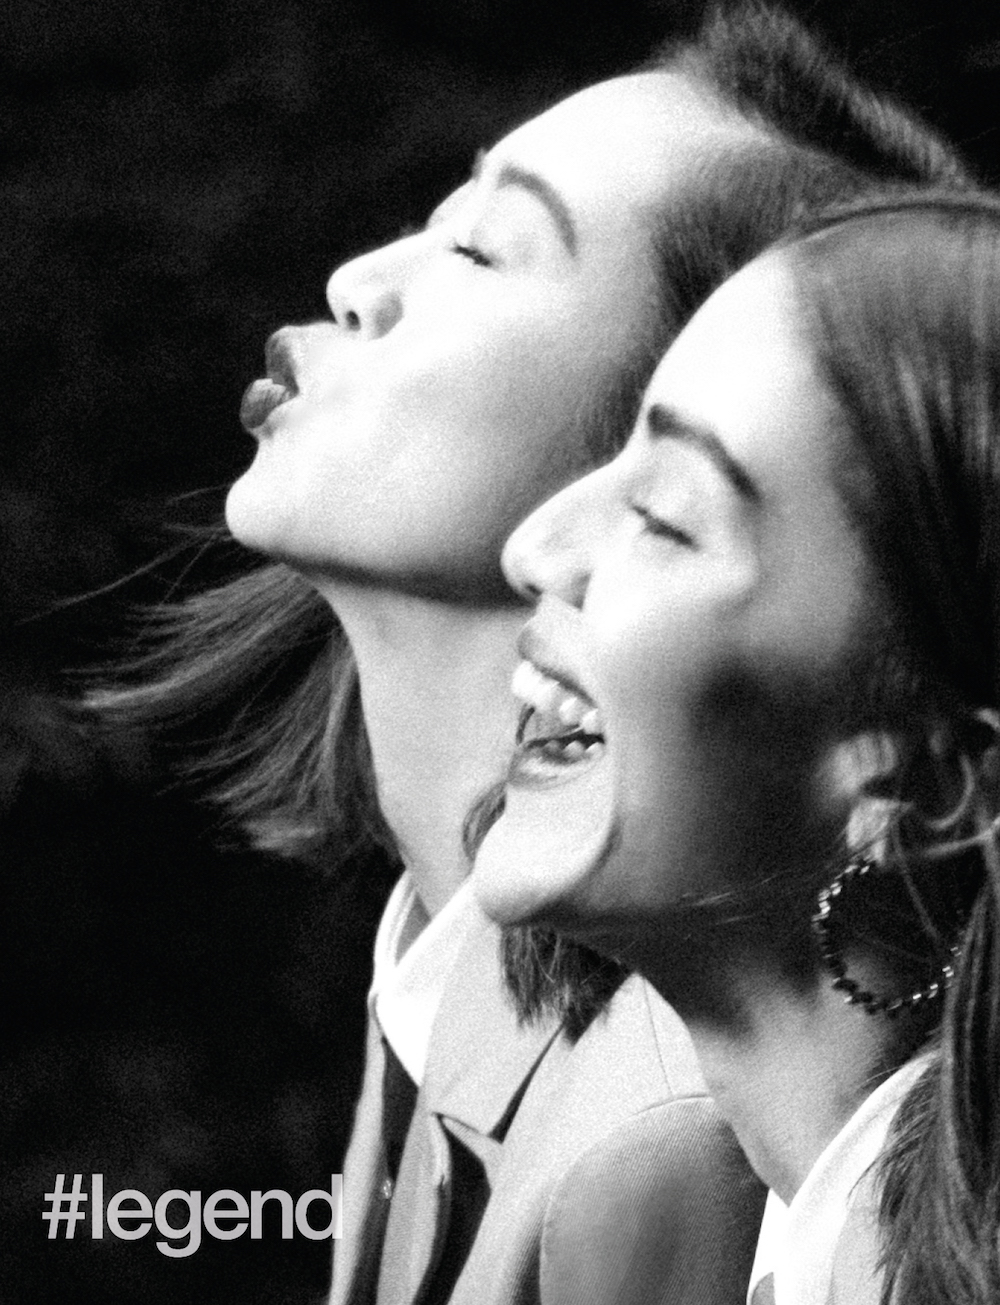 Cover story: Camila Coelho and Aimee Song on their friendship and careers —  Hashtag Legend